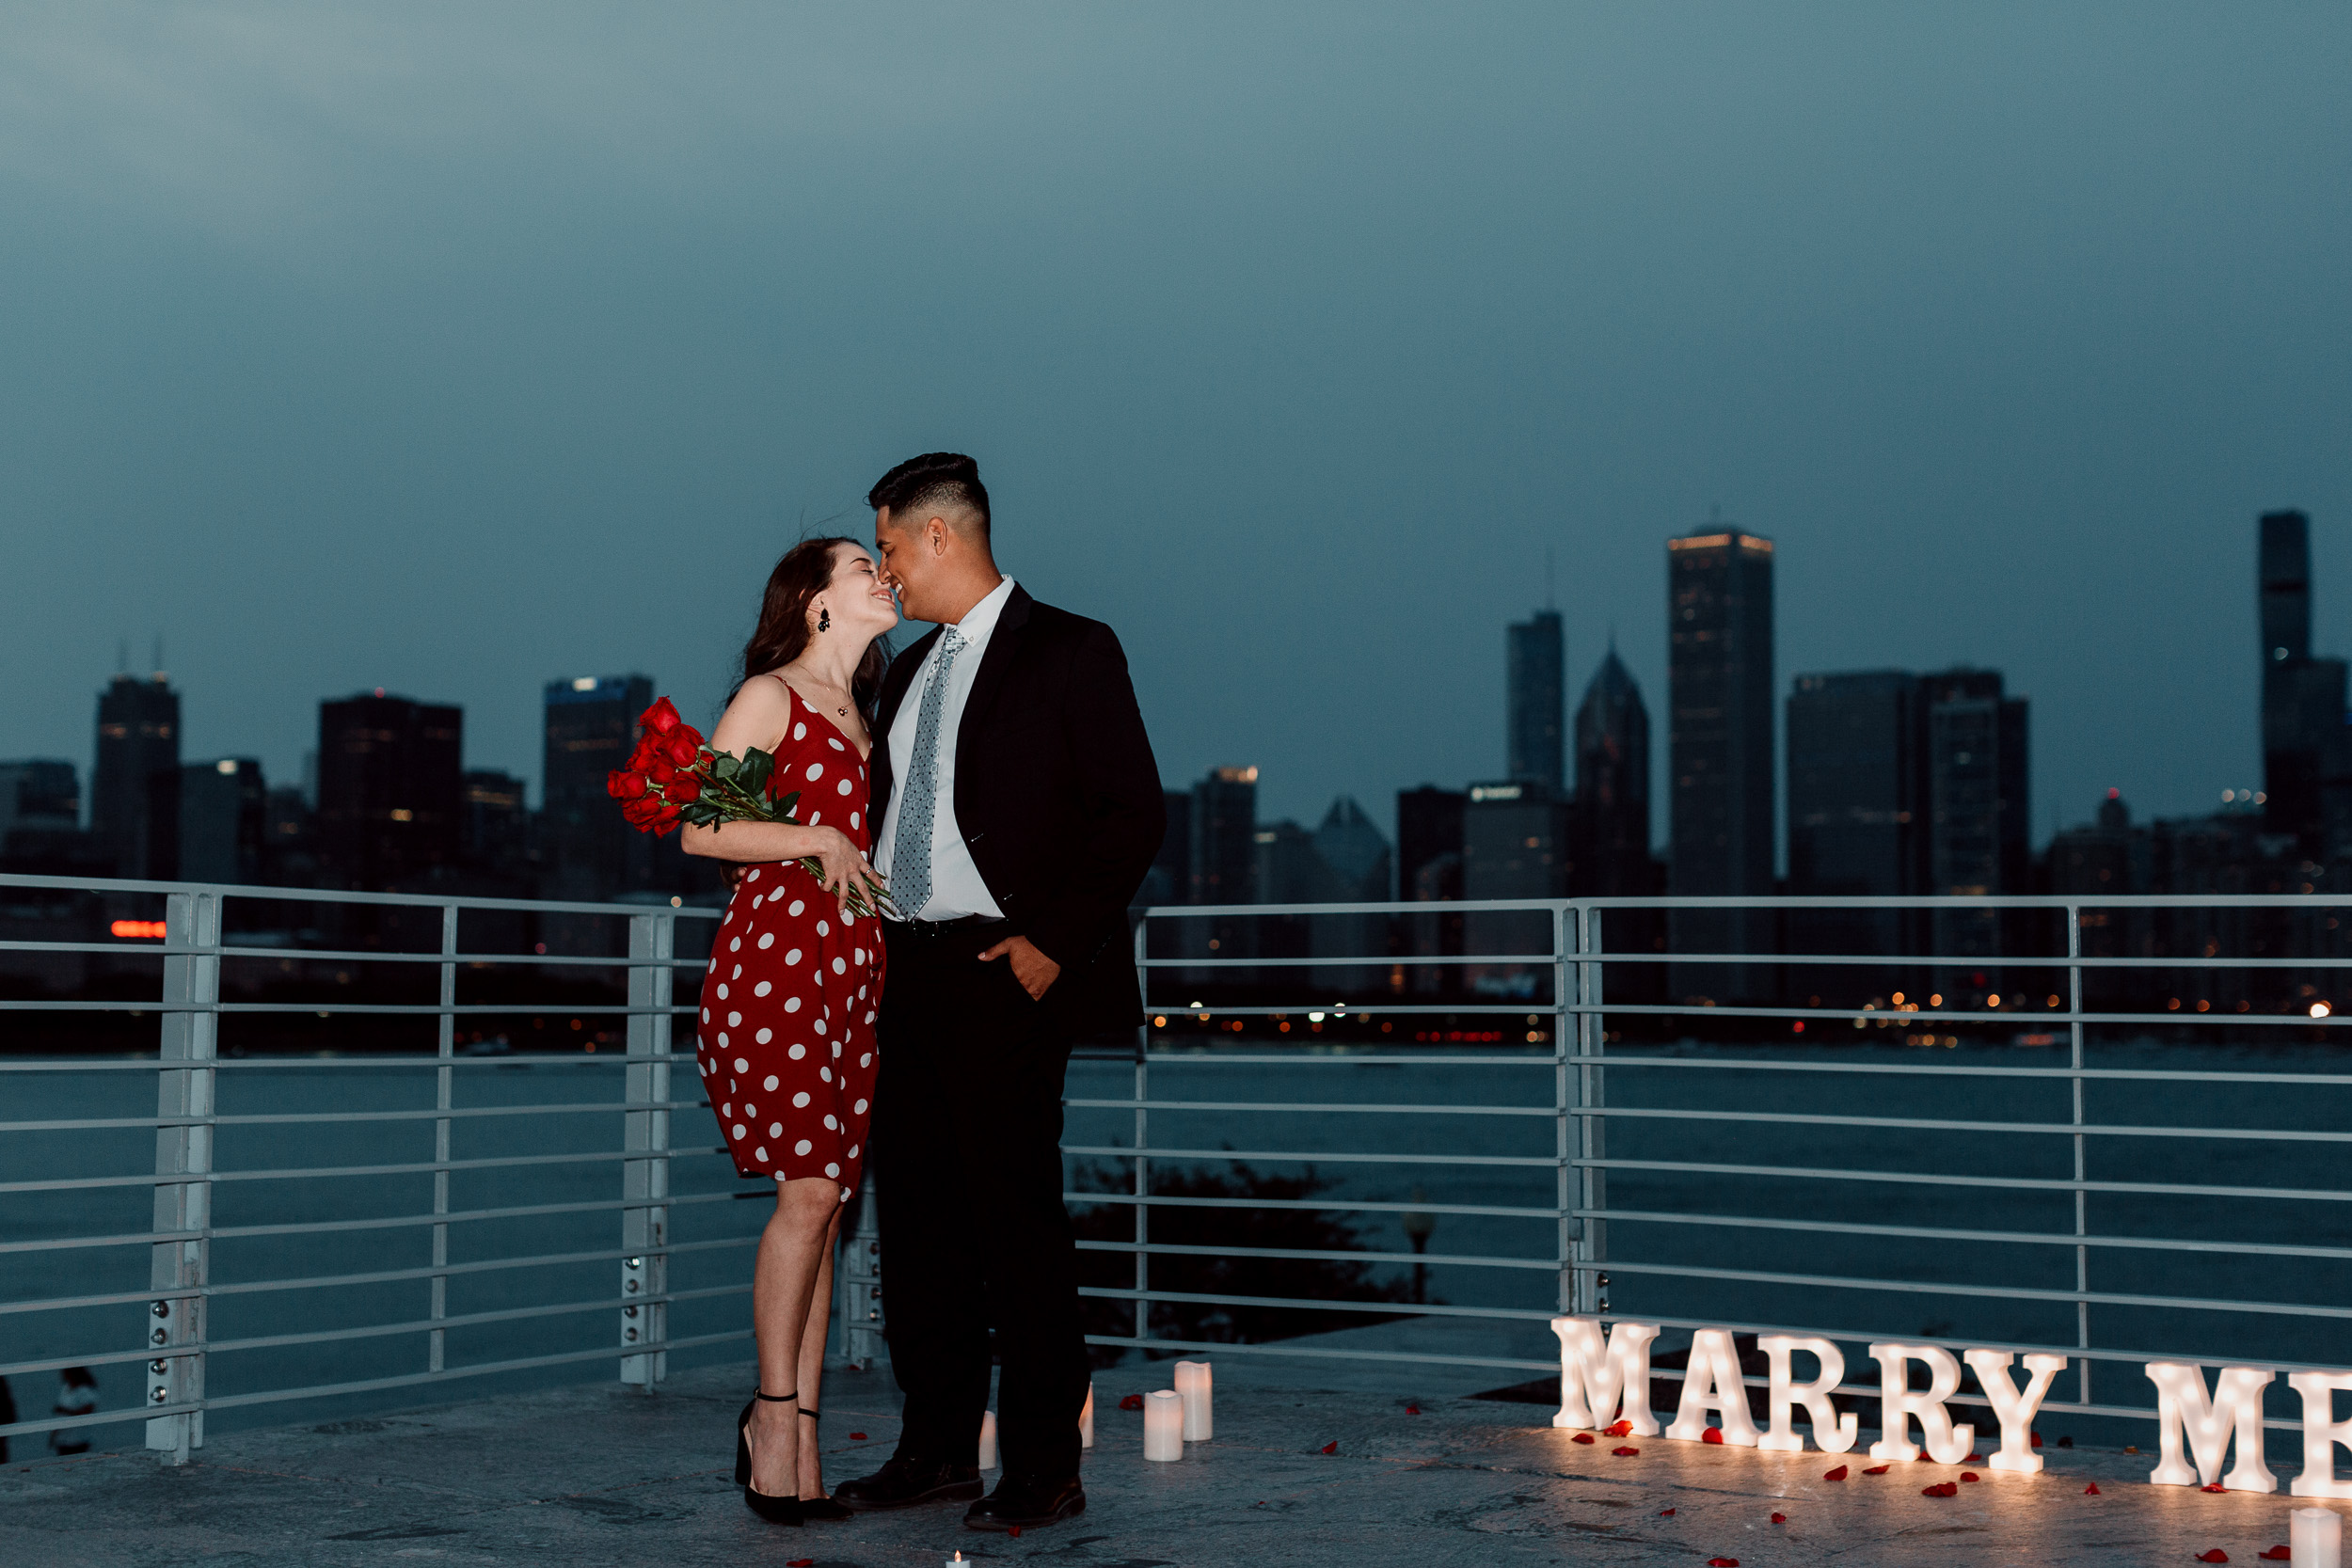 Marry me sign and engaged couple against Chicago skyline with a bouquet of roses | Chicago Skyline Proposal | Proposal Ideas | Chicago Engagement Photographer | Chicago Proposal Photographer | Chicago Proposal | Proposal Stories | How to Propose | She Said Yes | Engaged | Places to Get Engaged in Chicago